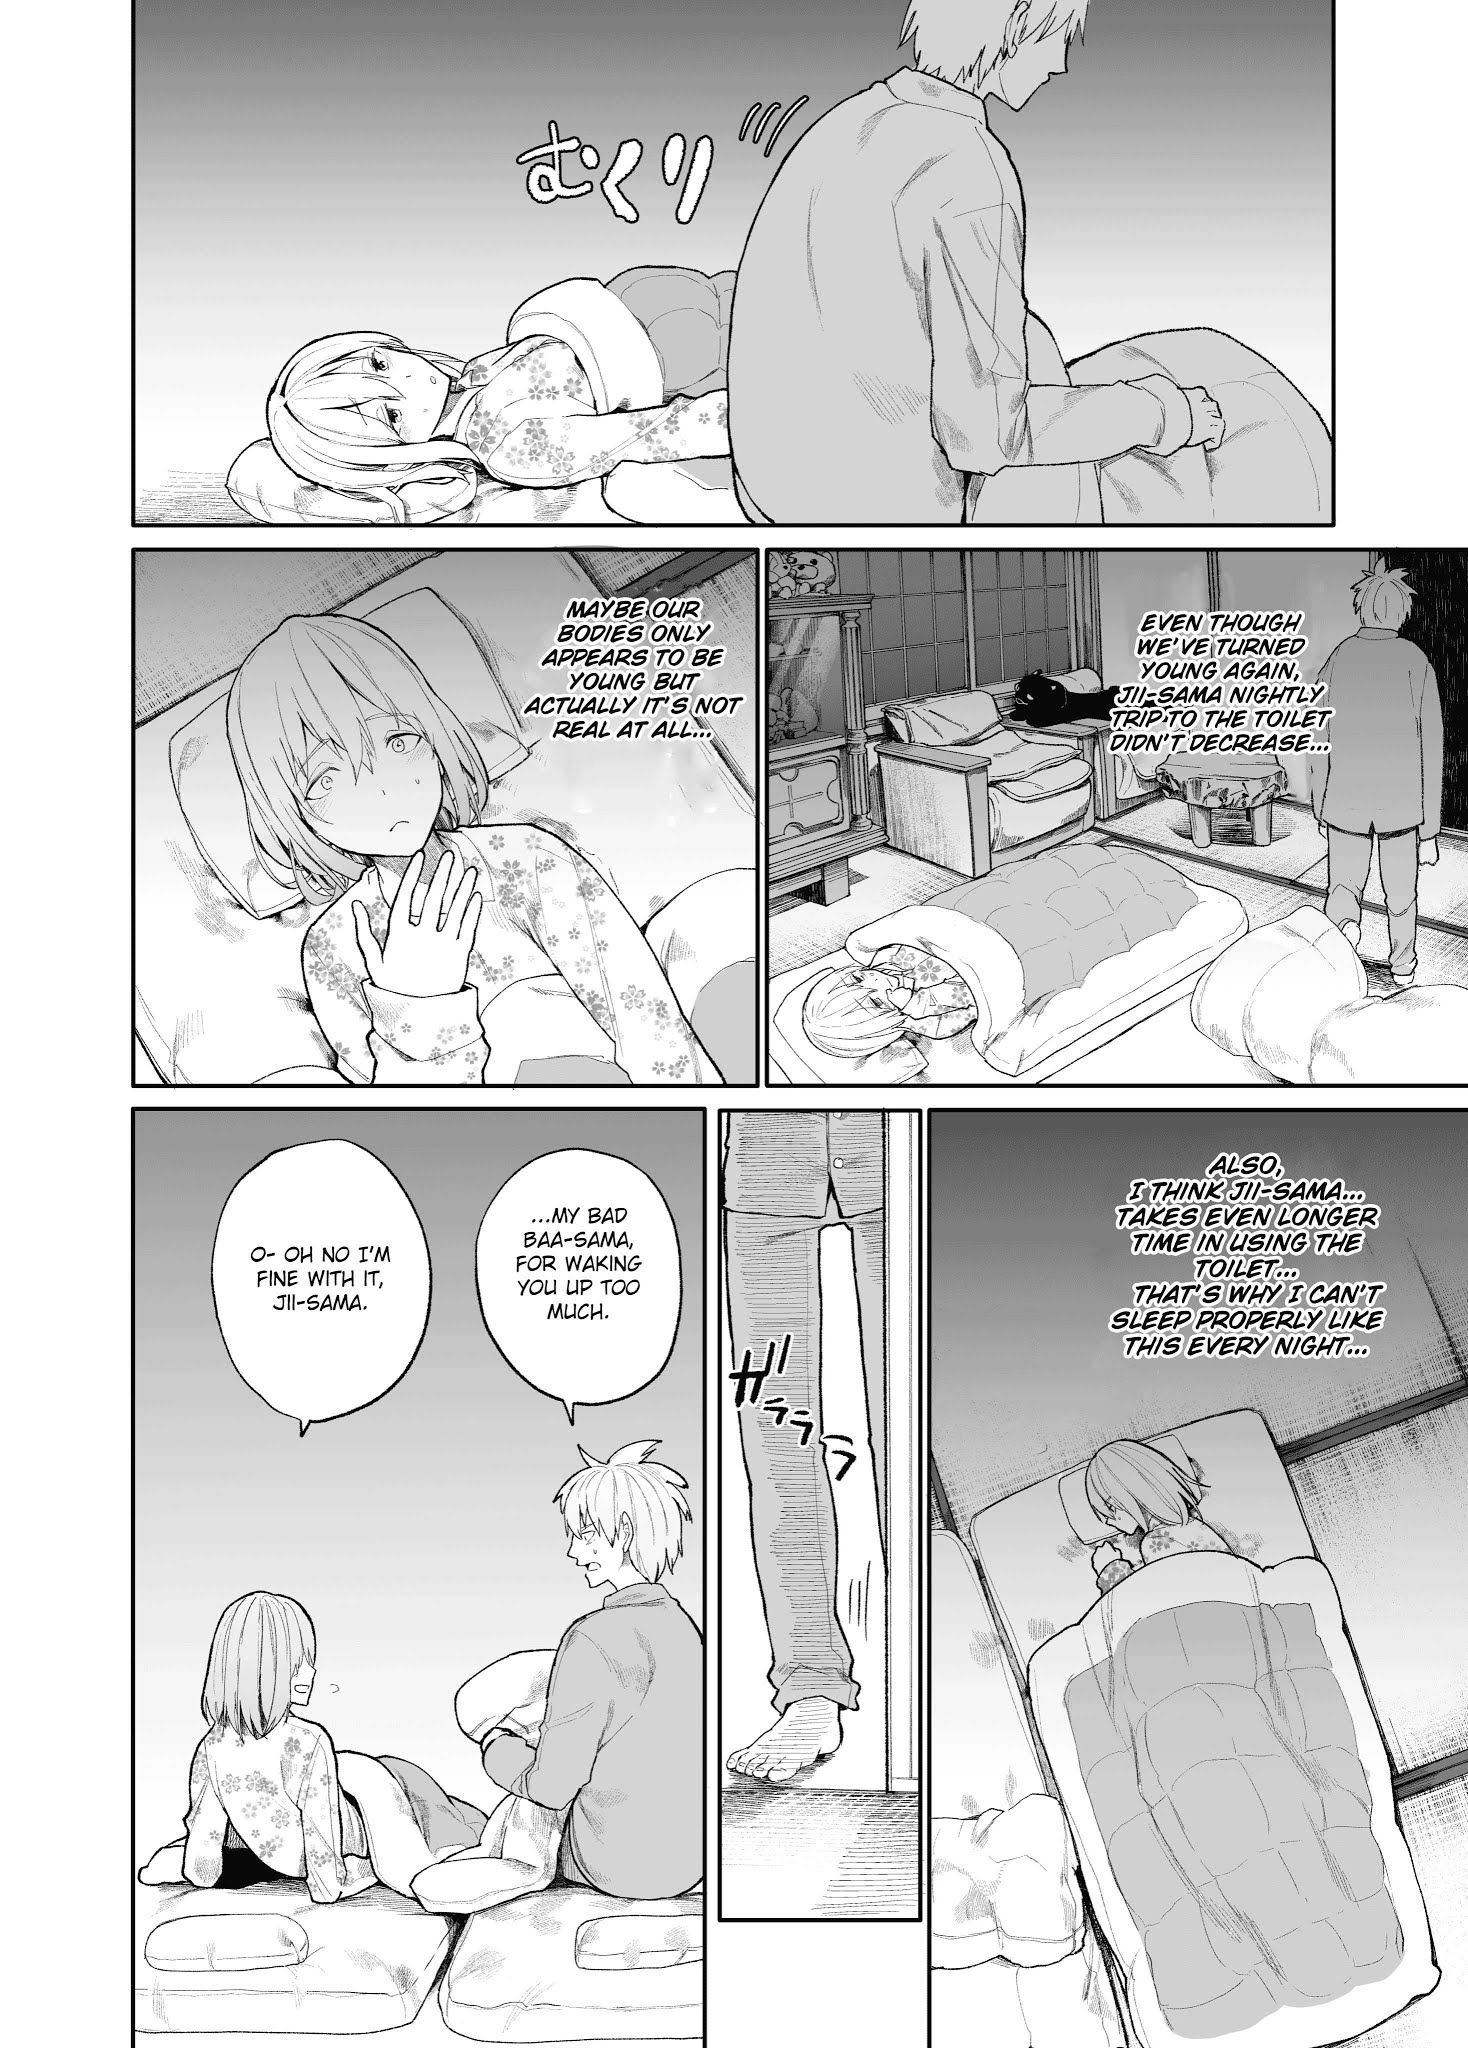 A Story About A Grampa And Granma Returned Back To Their Youth. - Page 2